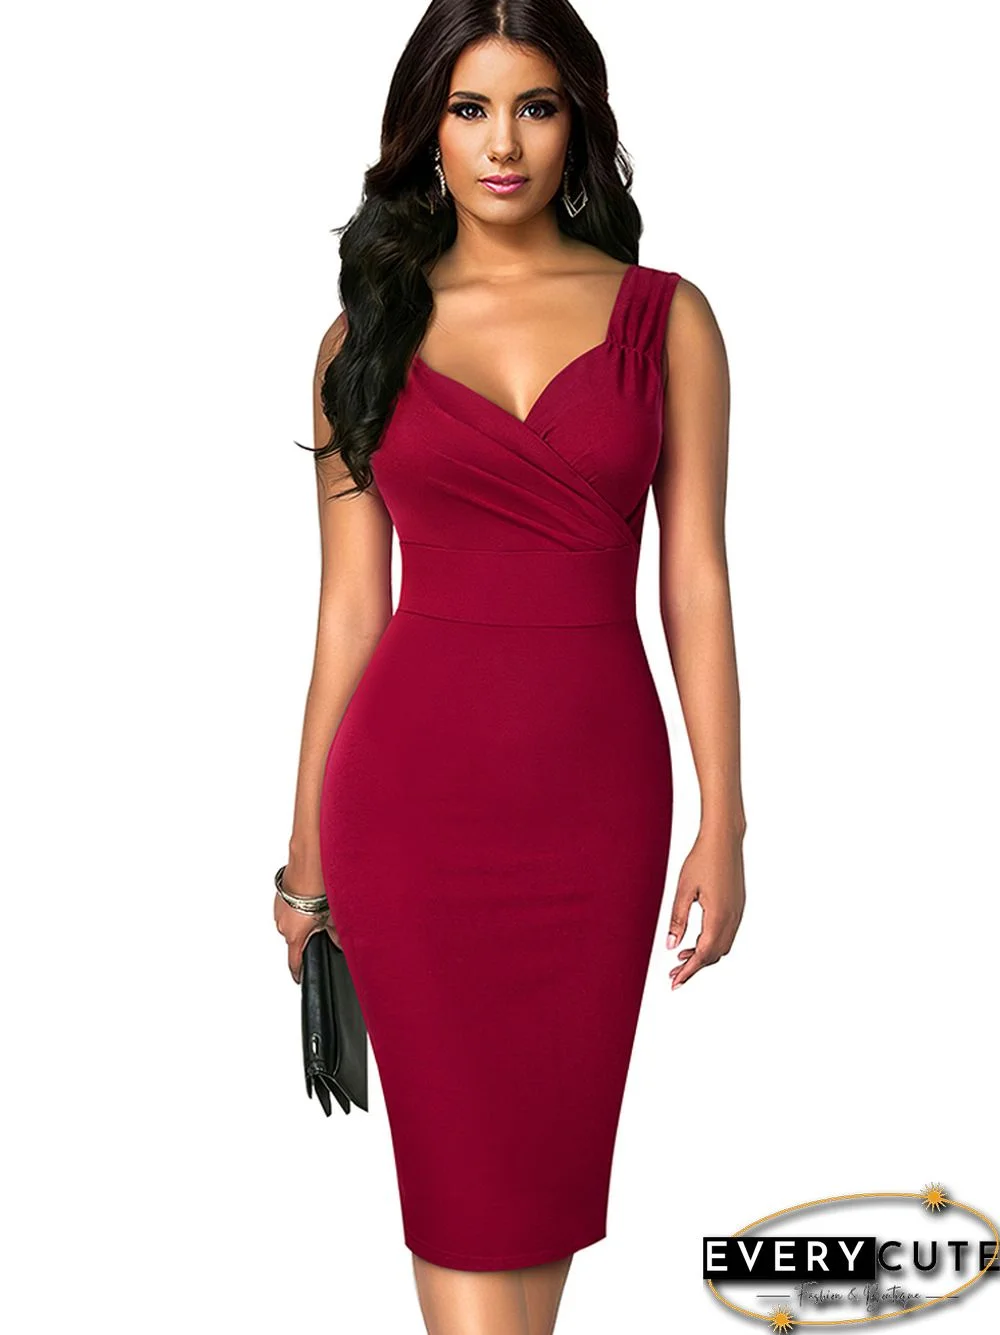 Nice-forever Summer Women Solid Color Sexy Deep V Elegant Dresses Cocktail Wedding Party Vintage Bodycon Sheath Dress B669